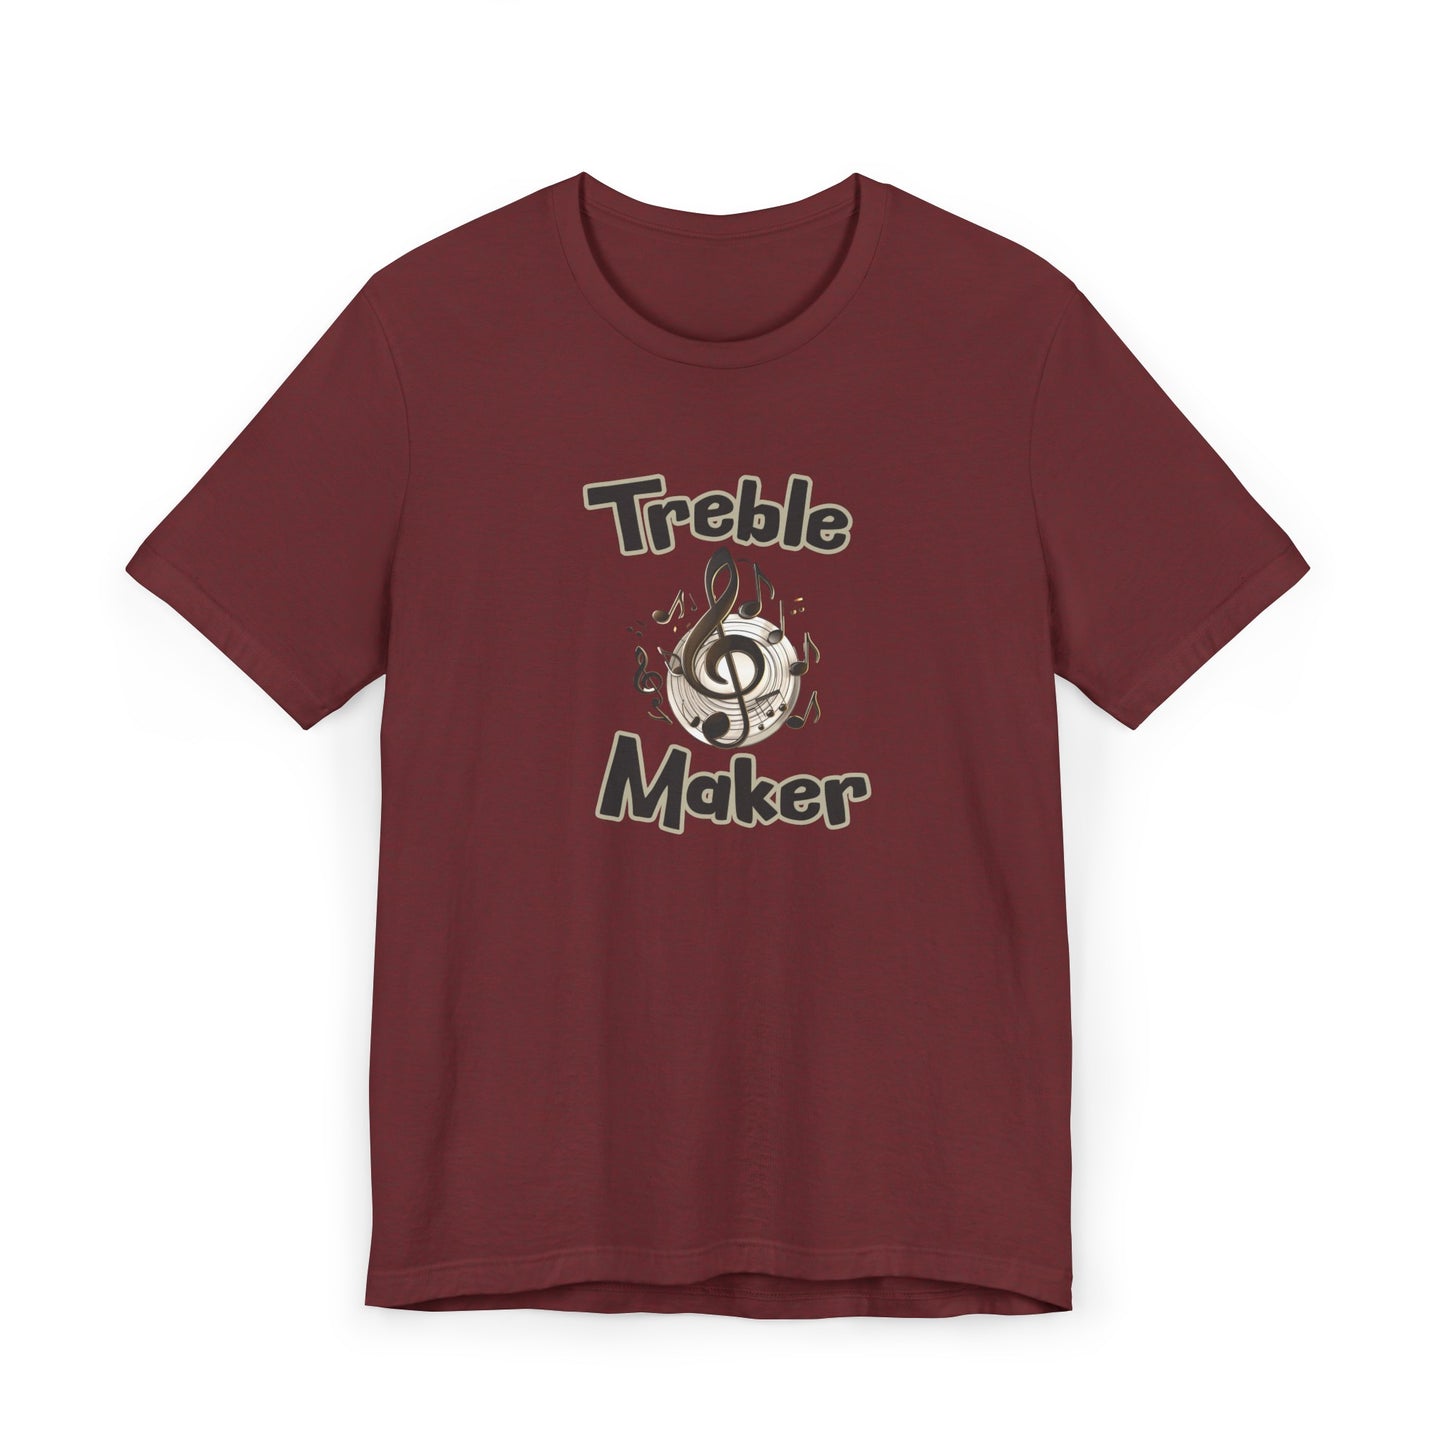 Treble maker T-shirt in Cardinal Red color 